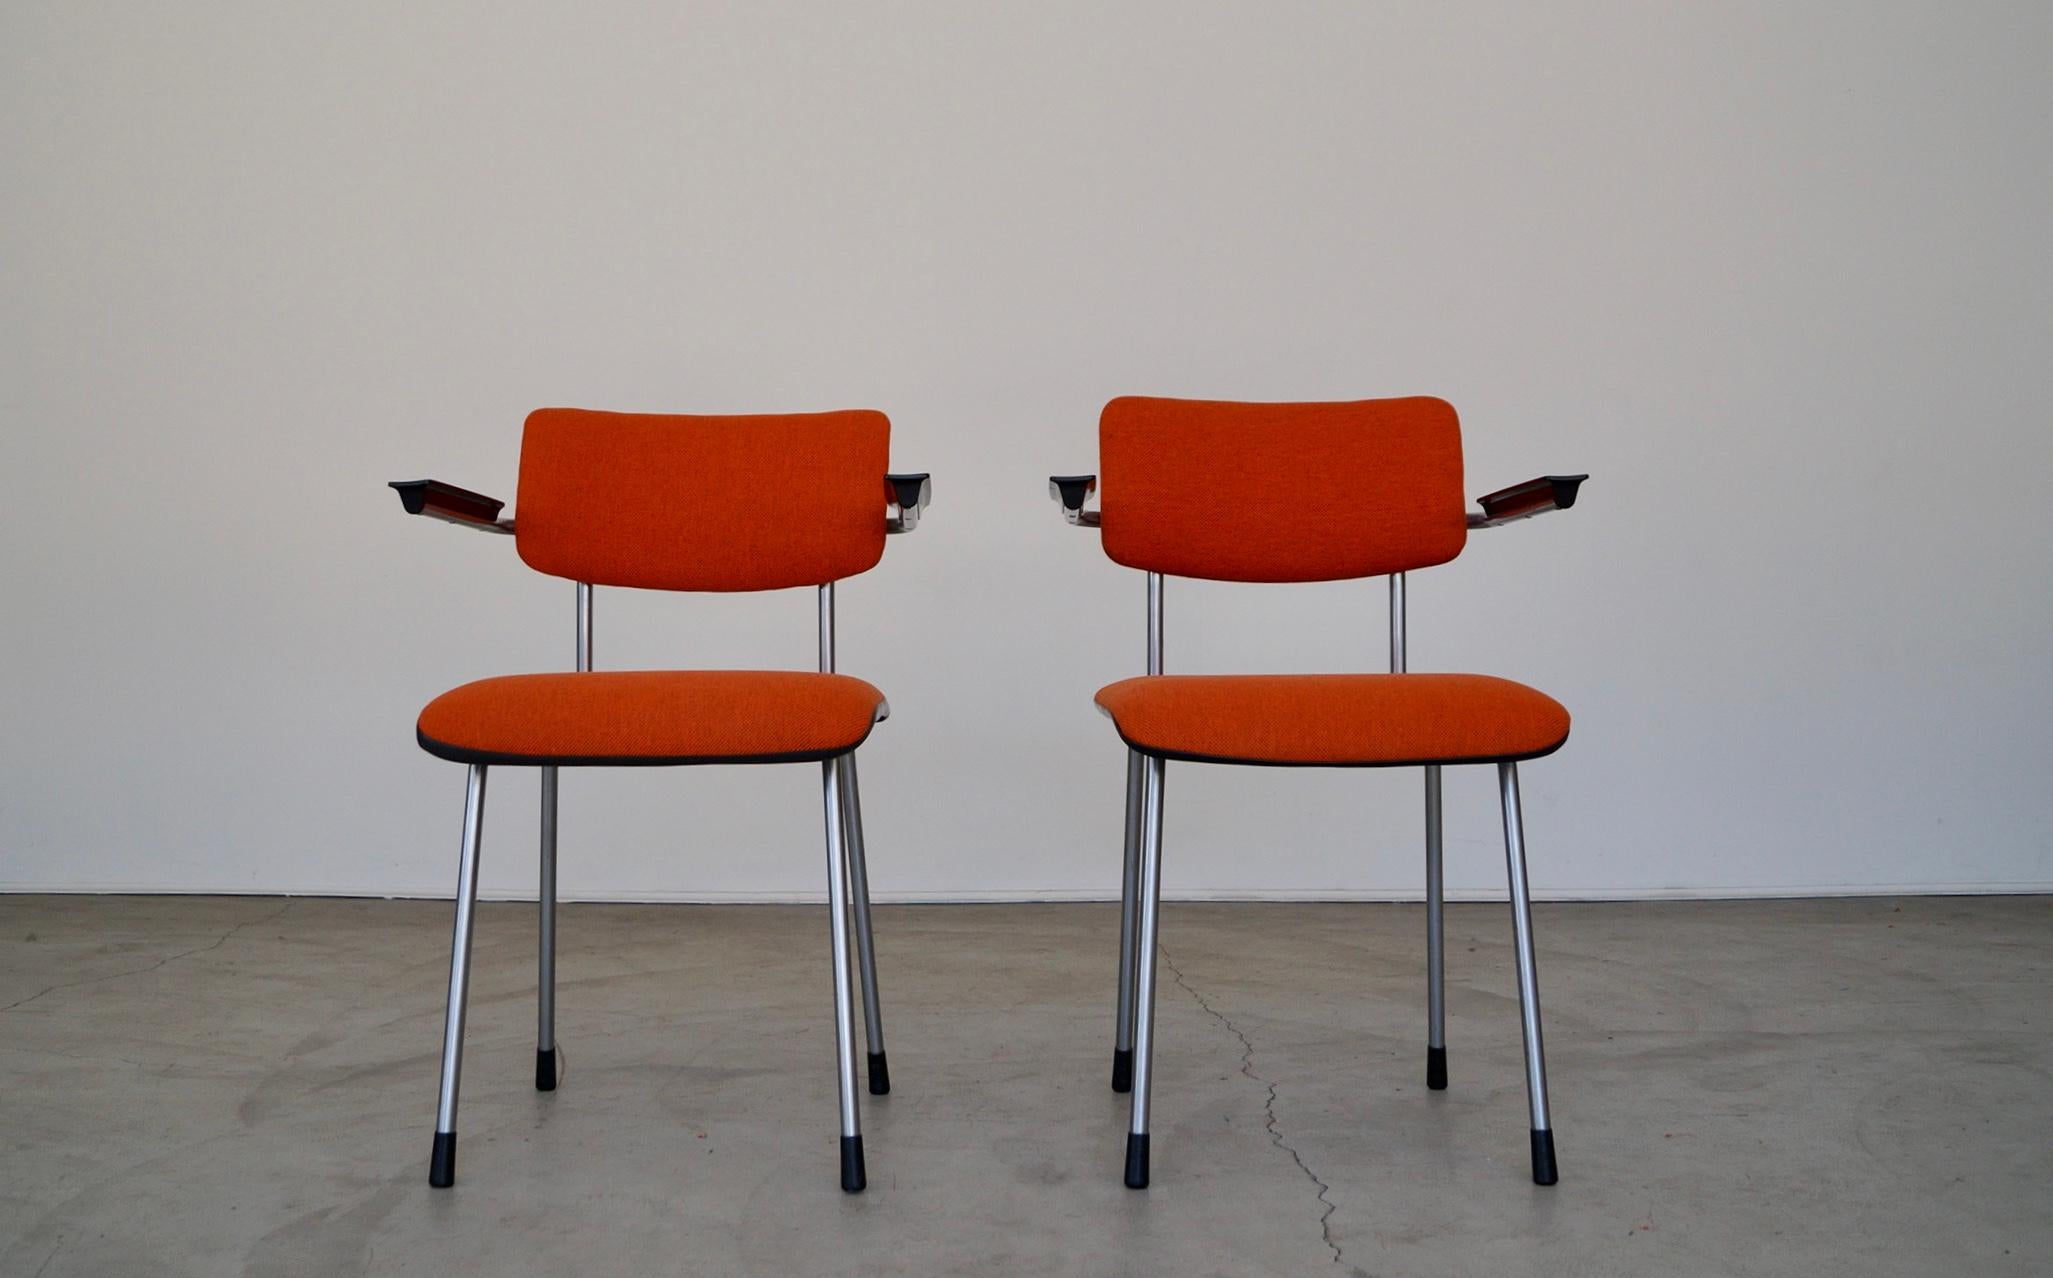 We have a pair of original 1950's Mid-century Modern Gispen armchairs for sale. They were designed by William H. Gispen in the late 1950's, and were manufactured in The Netherlands. They are original, and have been professionally reupholstered in